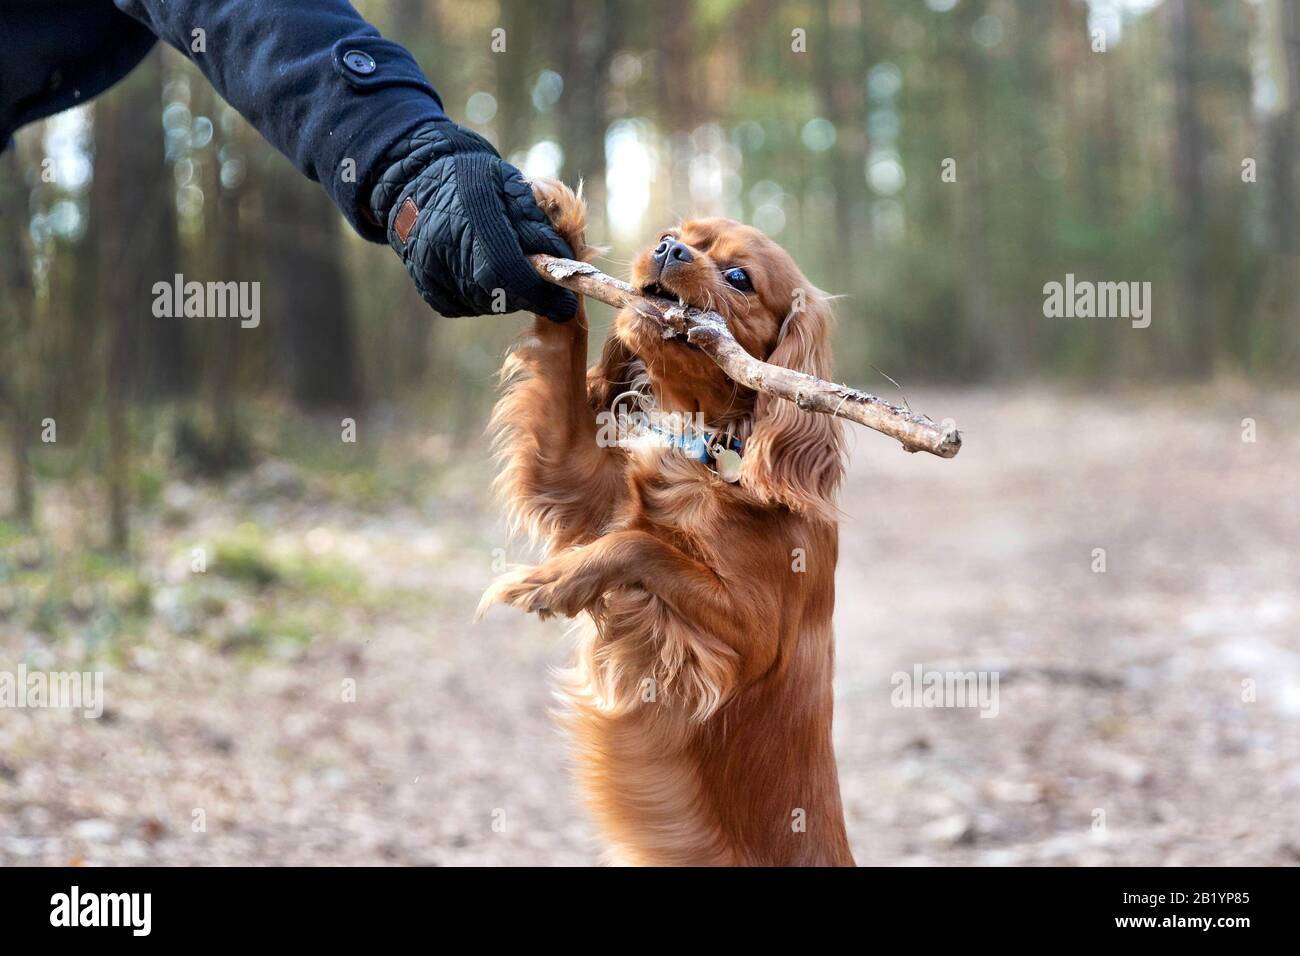 Funny dog playing with wooden stick in the forest Stock Photo